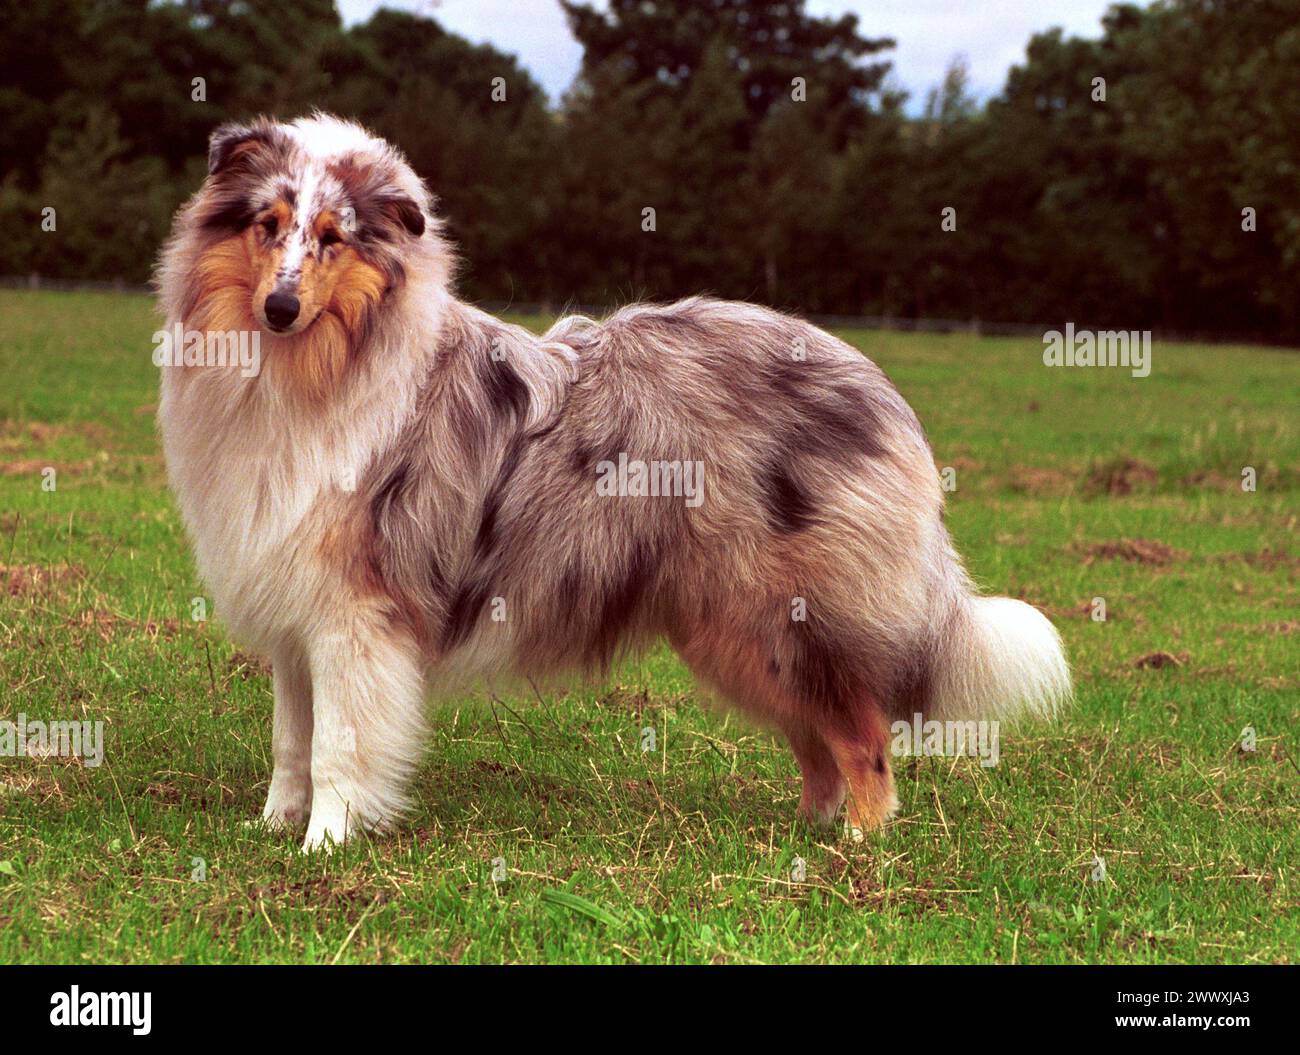 Alert Rough Collie Dog Blue Merle Stood in Field Stock Photo